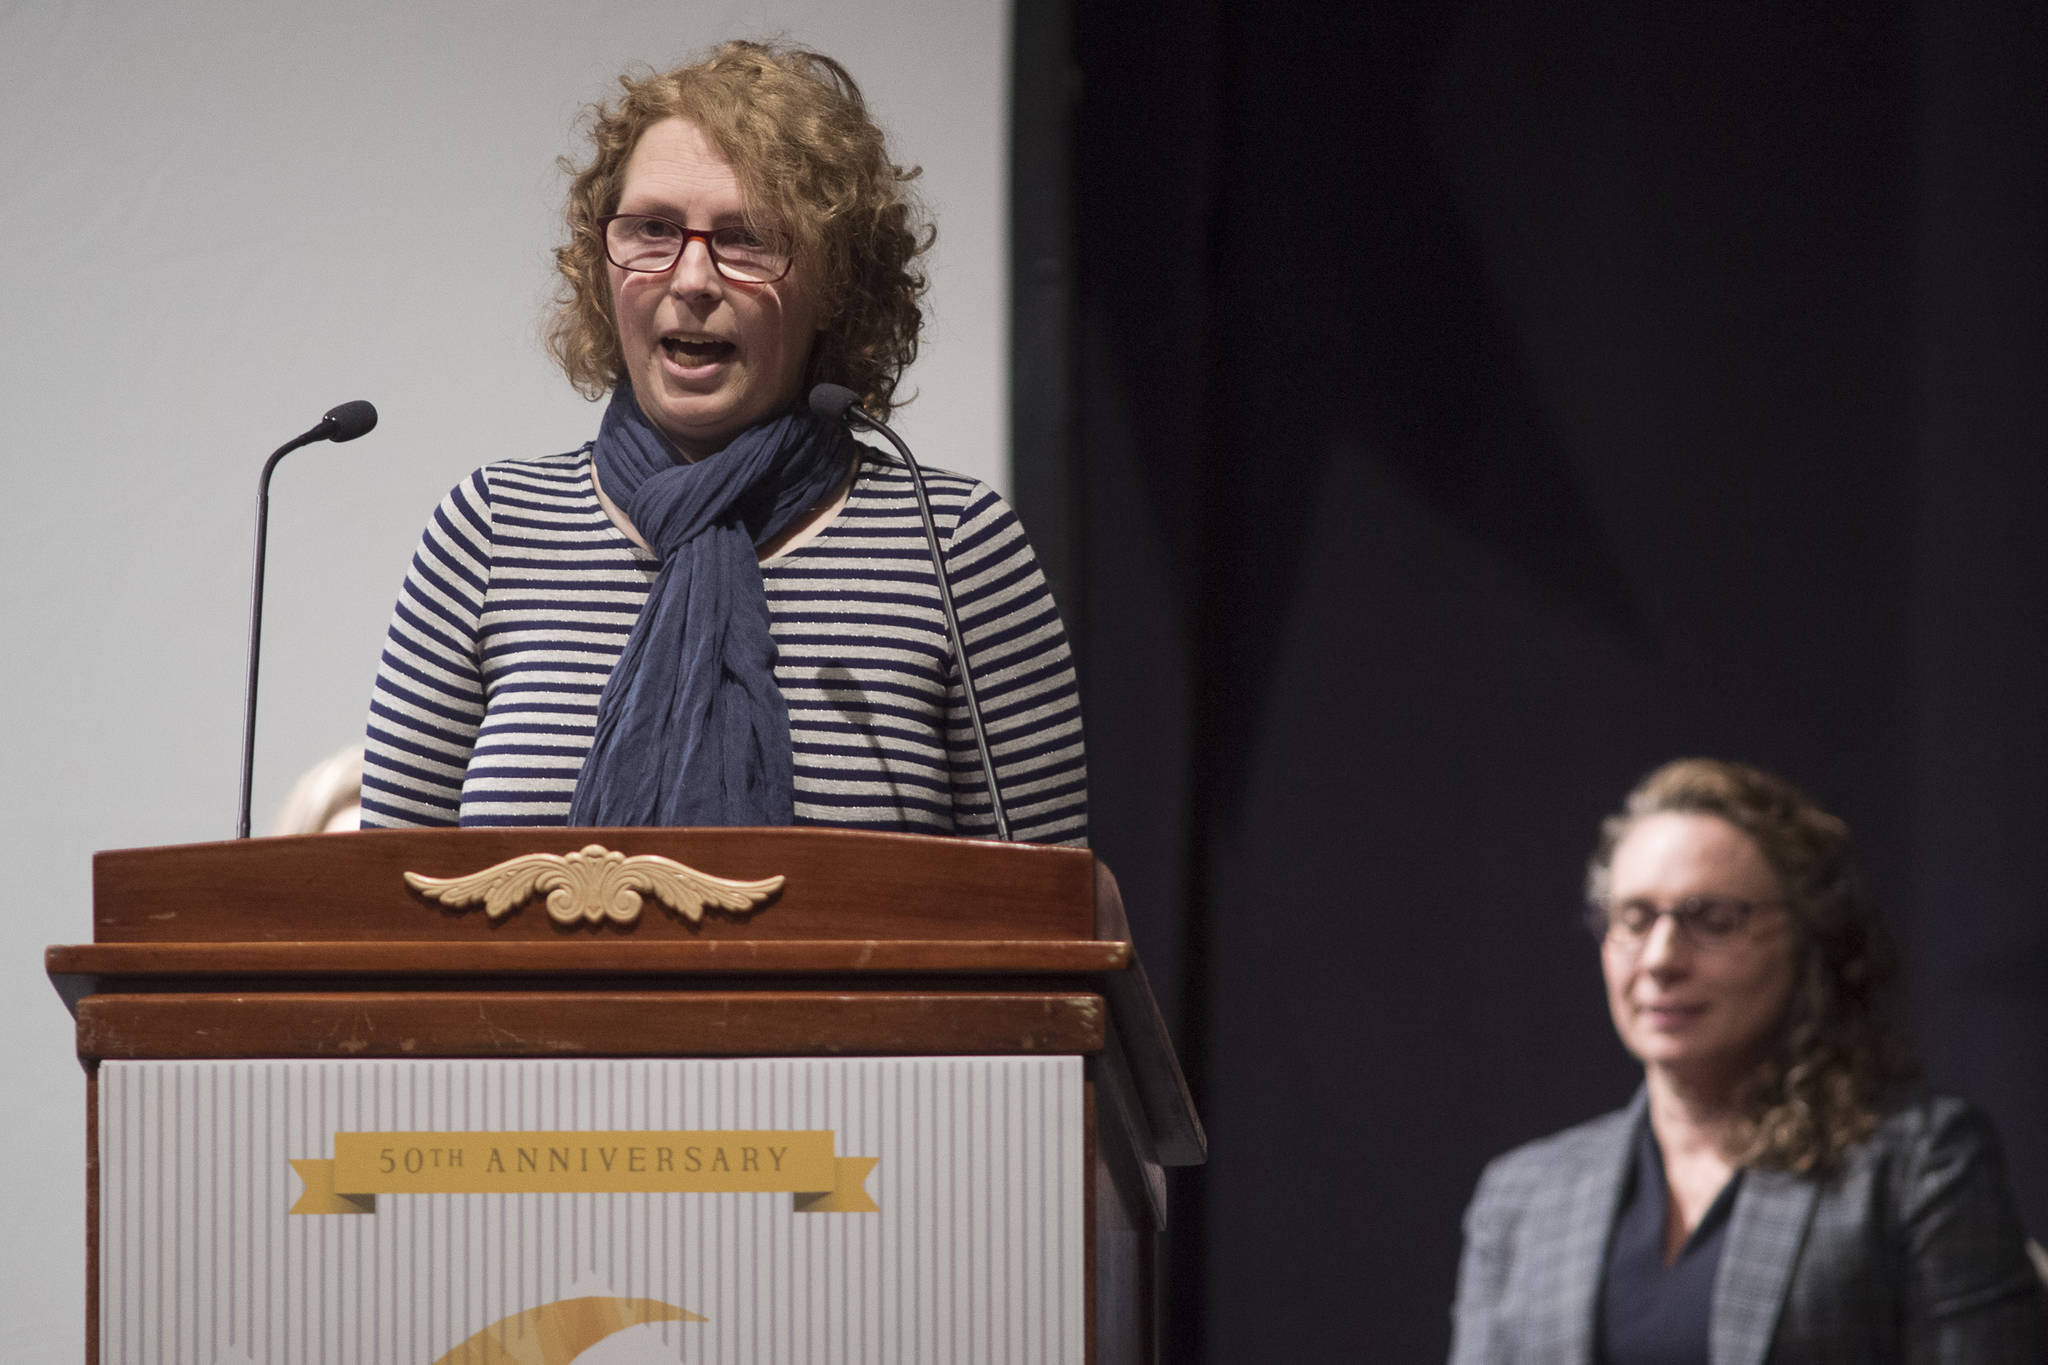 Shannon Haugland, of Sitka, gives a thank you speech after winning the Arts Advocacy Award at the 2019 Governor’s Arts and Humanities Awards at the Juneau Arts & Culture Center on Thursday, Feb. 7, 2019. (Michael Penn | Juneau Empire)